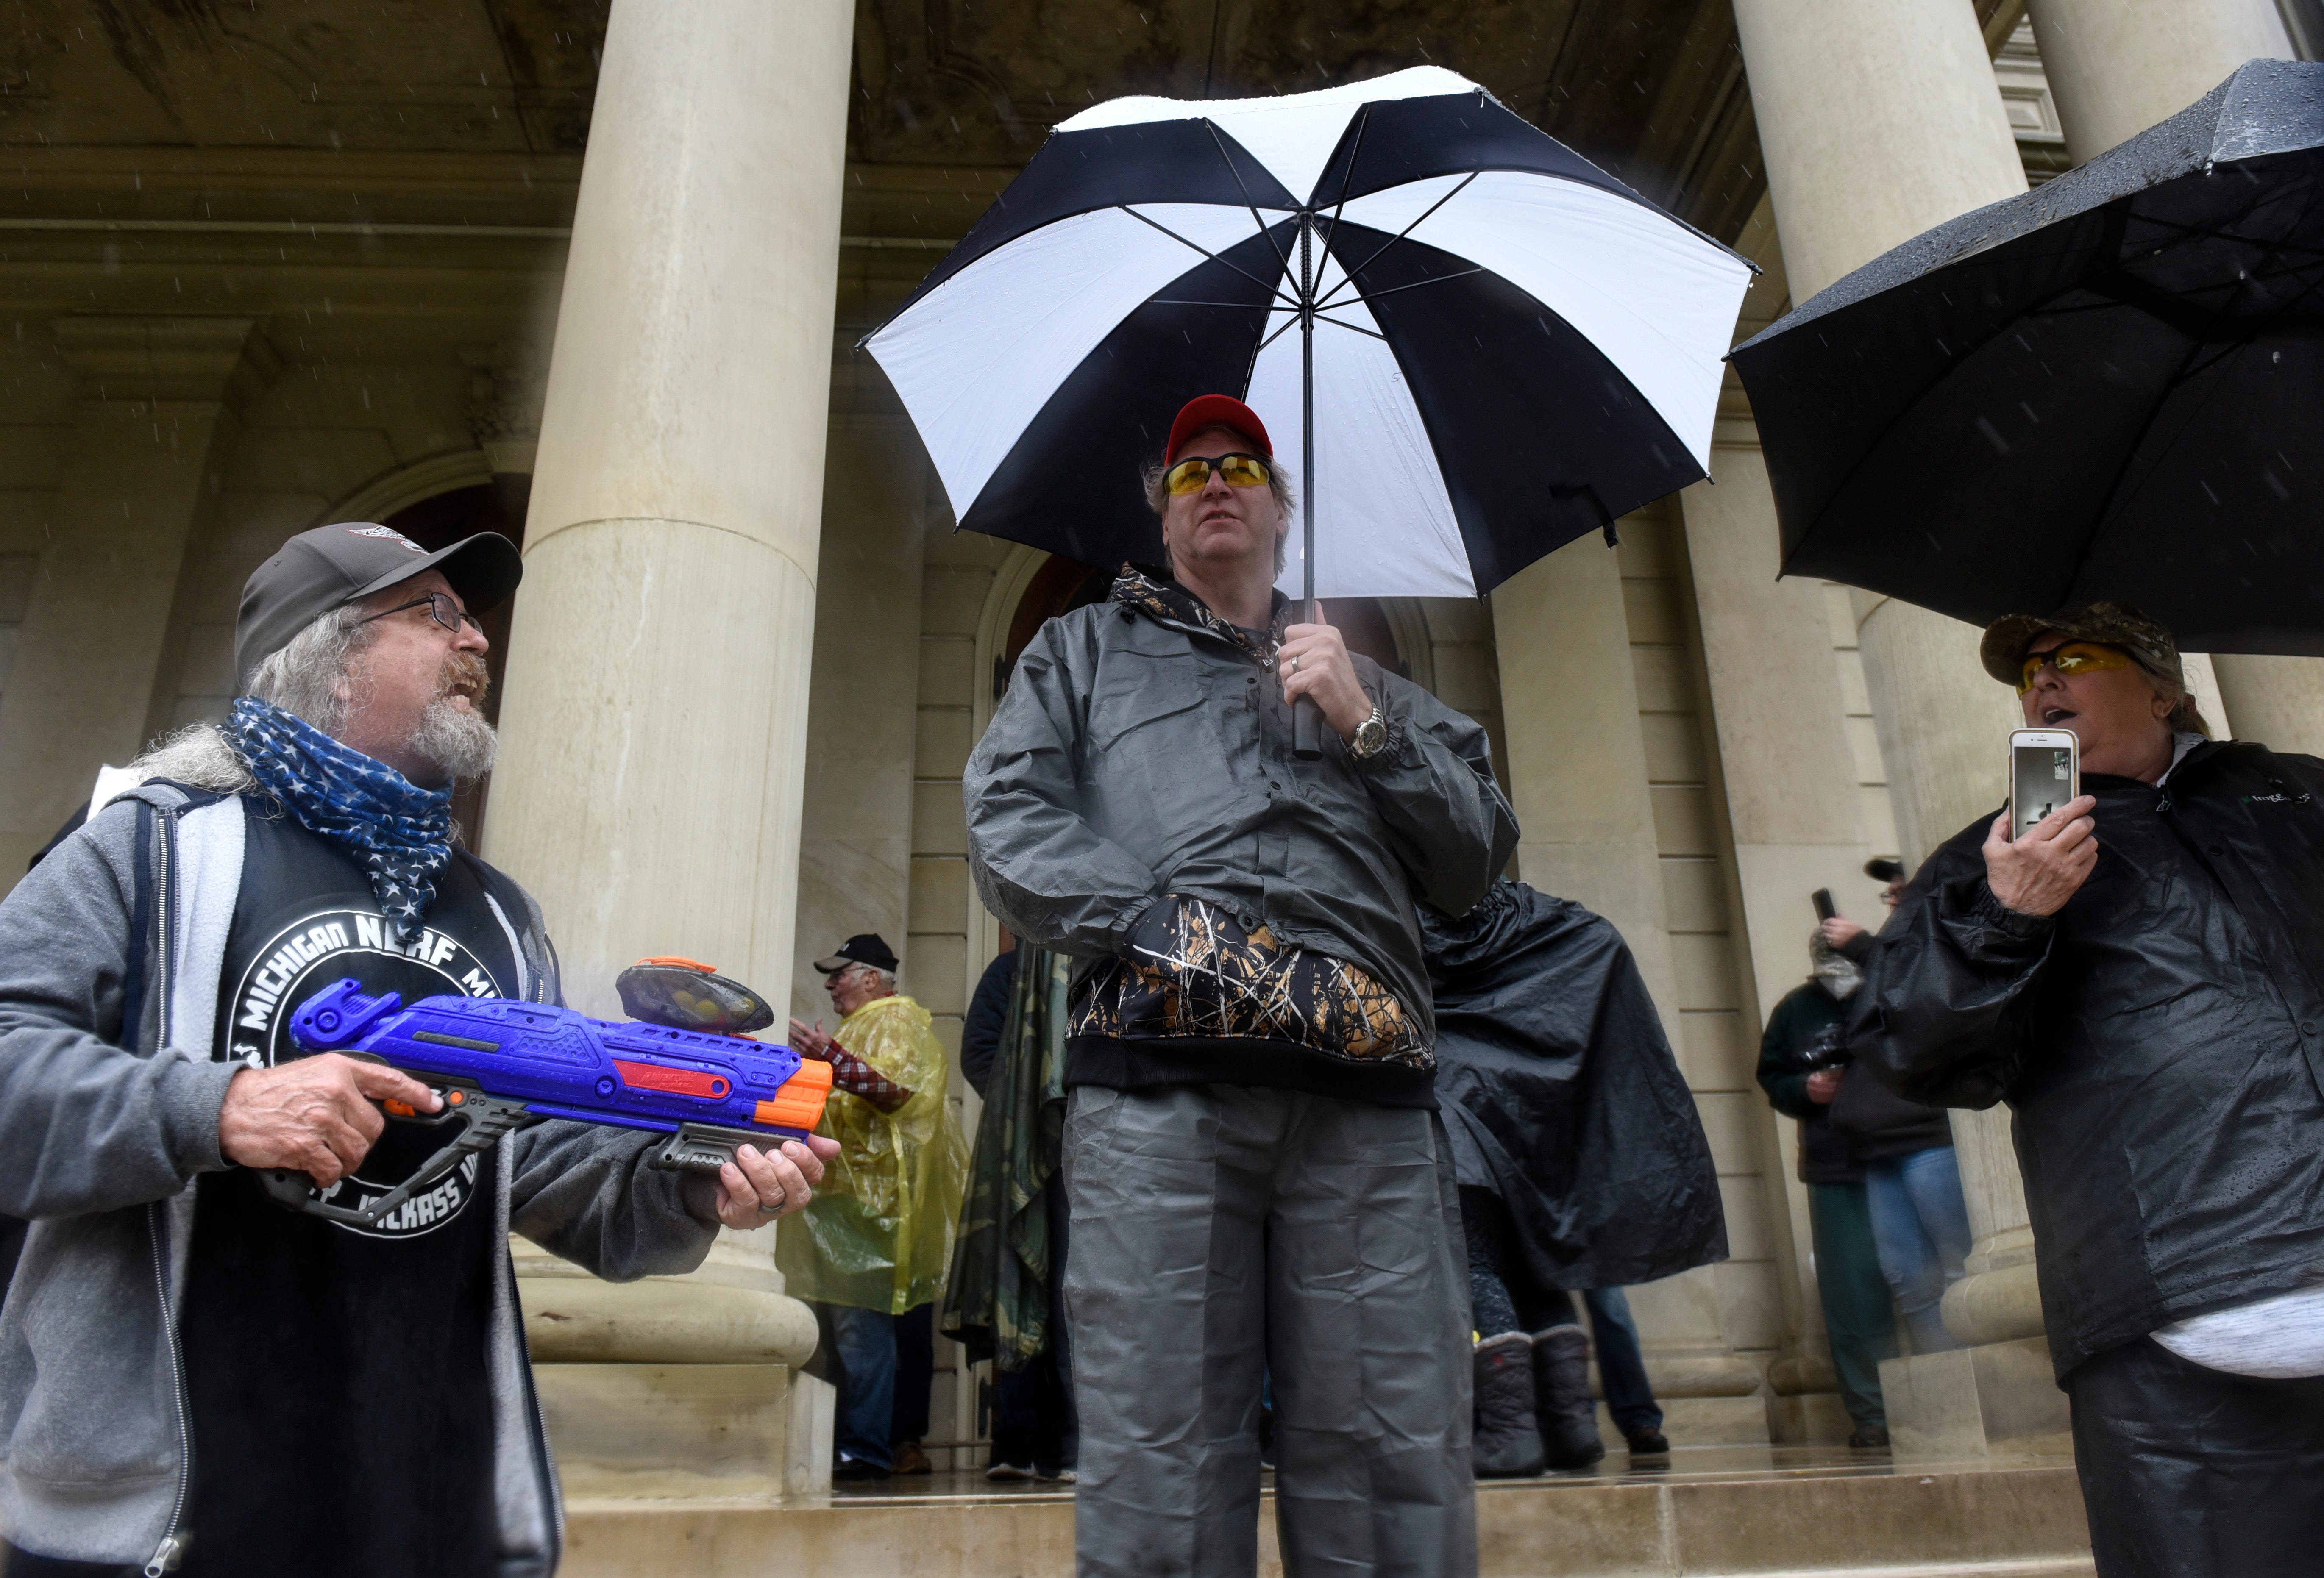 A man who says he founded the Michigan Nerf Militia to make fun of Michigan militias argues with protesters outside the state Capitol building in Lansing.